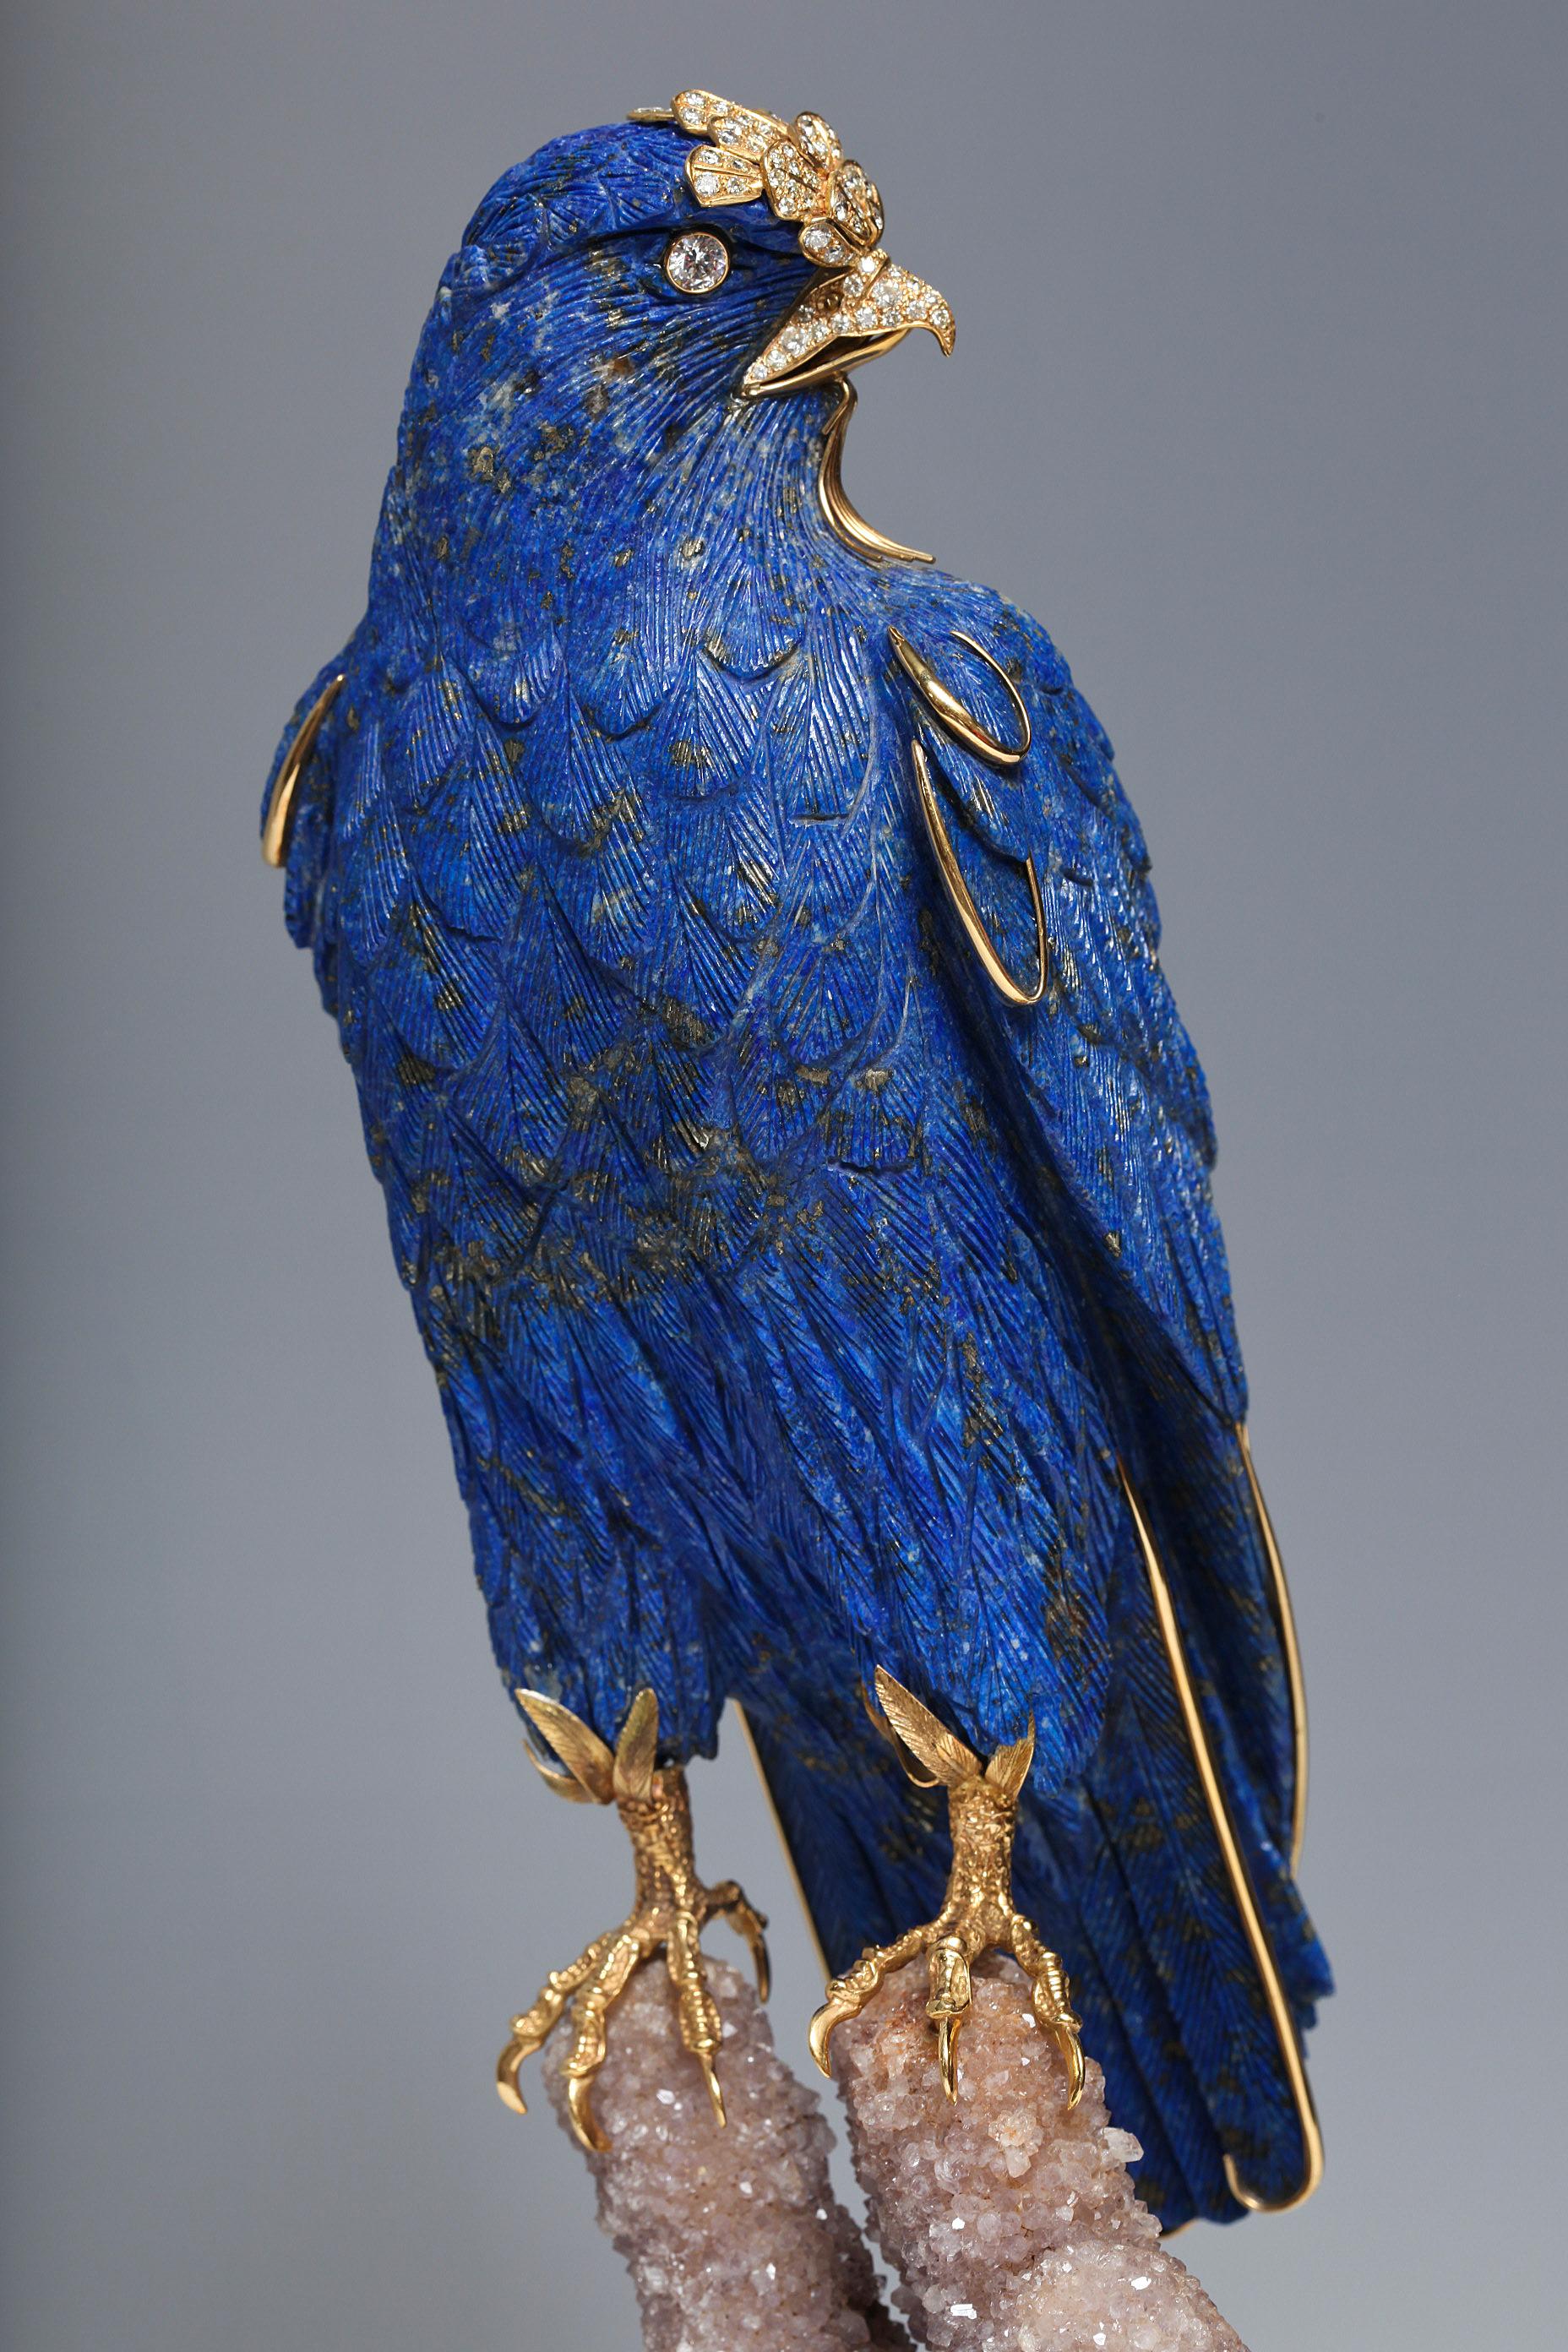 Hand-Carved An Important Jeweled, Gold, Lapis Lazuli Falcon by Asprey & Co. London, Signed